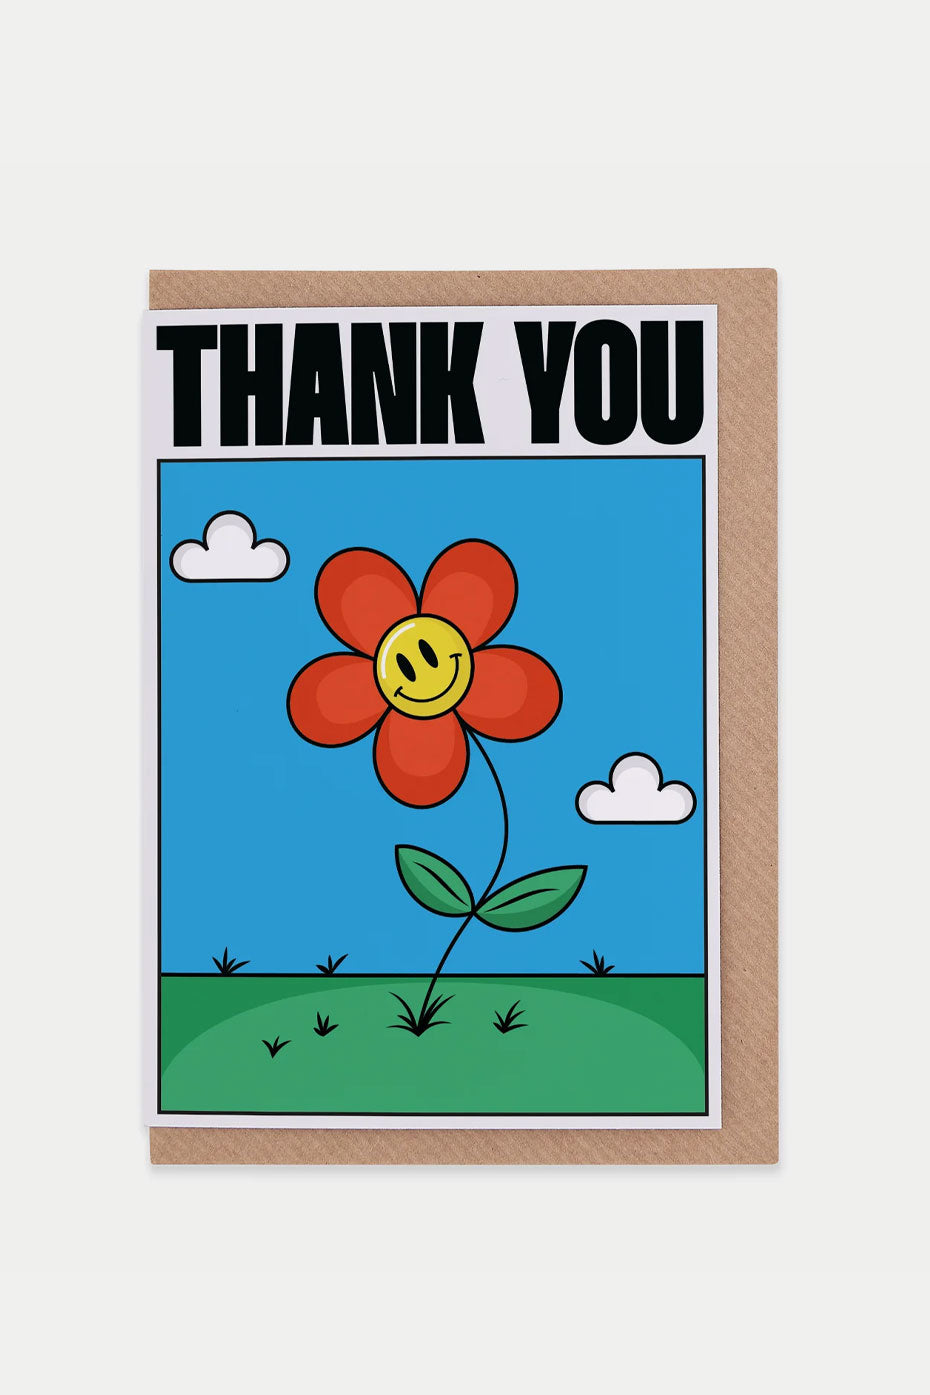 evermade-thank-you-greetings-card-1